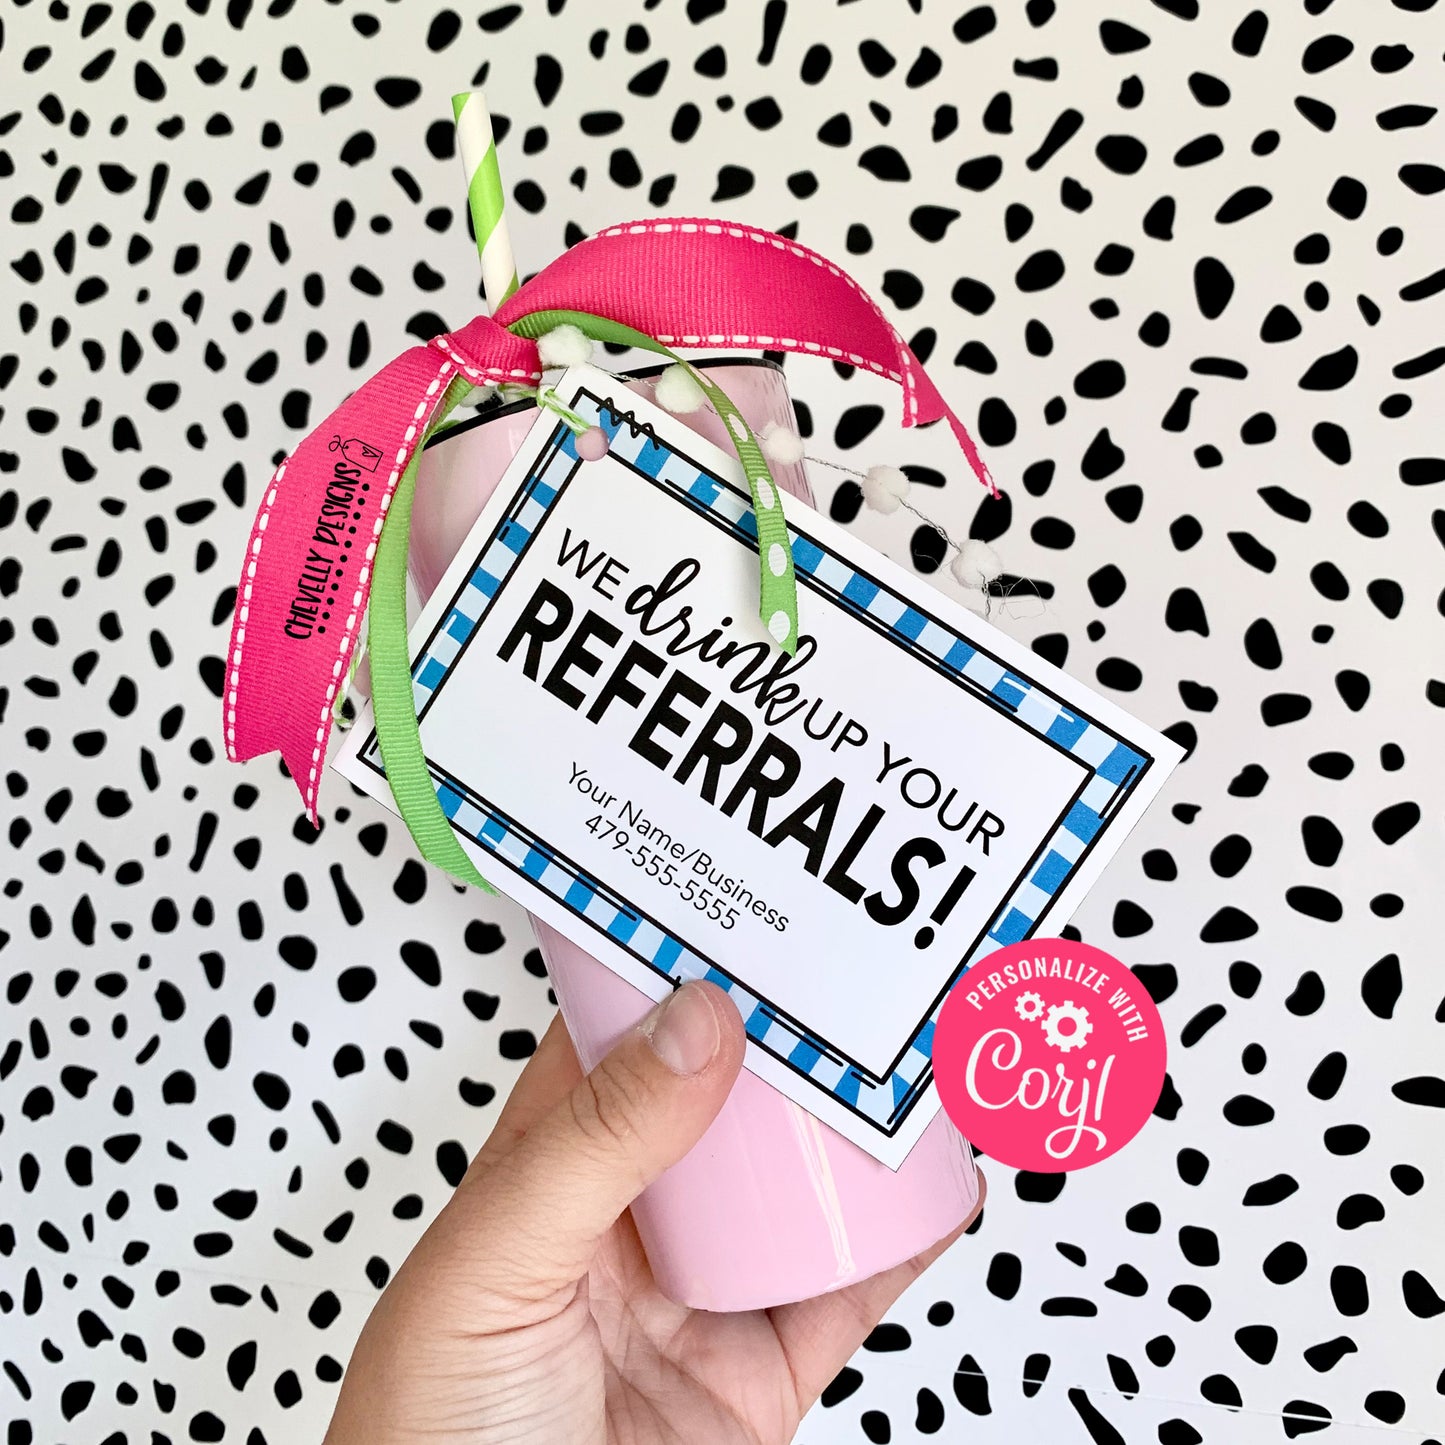 Editable - We Drink Up Your Referrals - Business Marketing Gift Tags - Printable Digital File